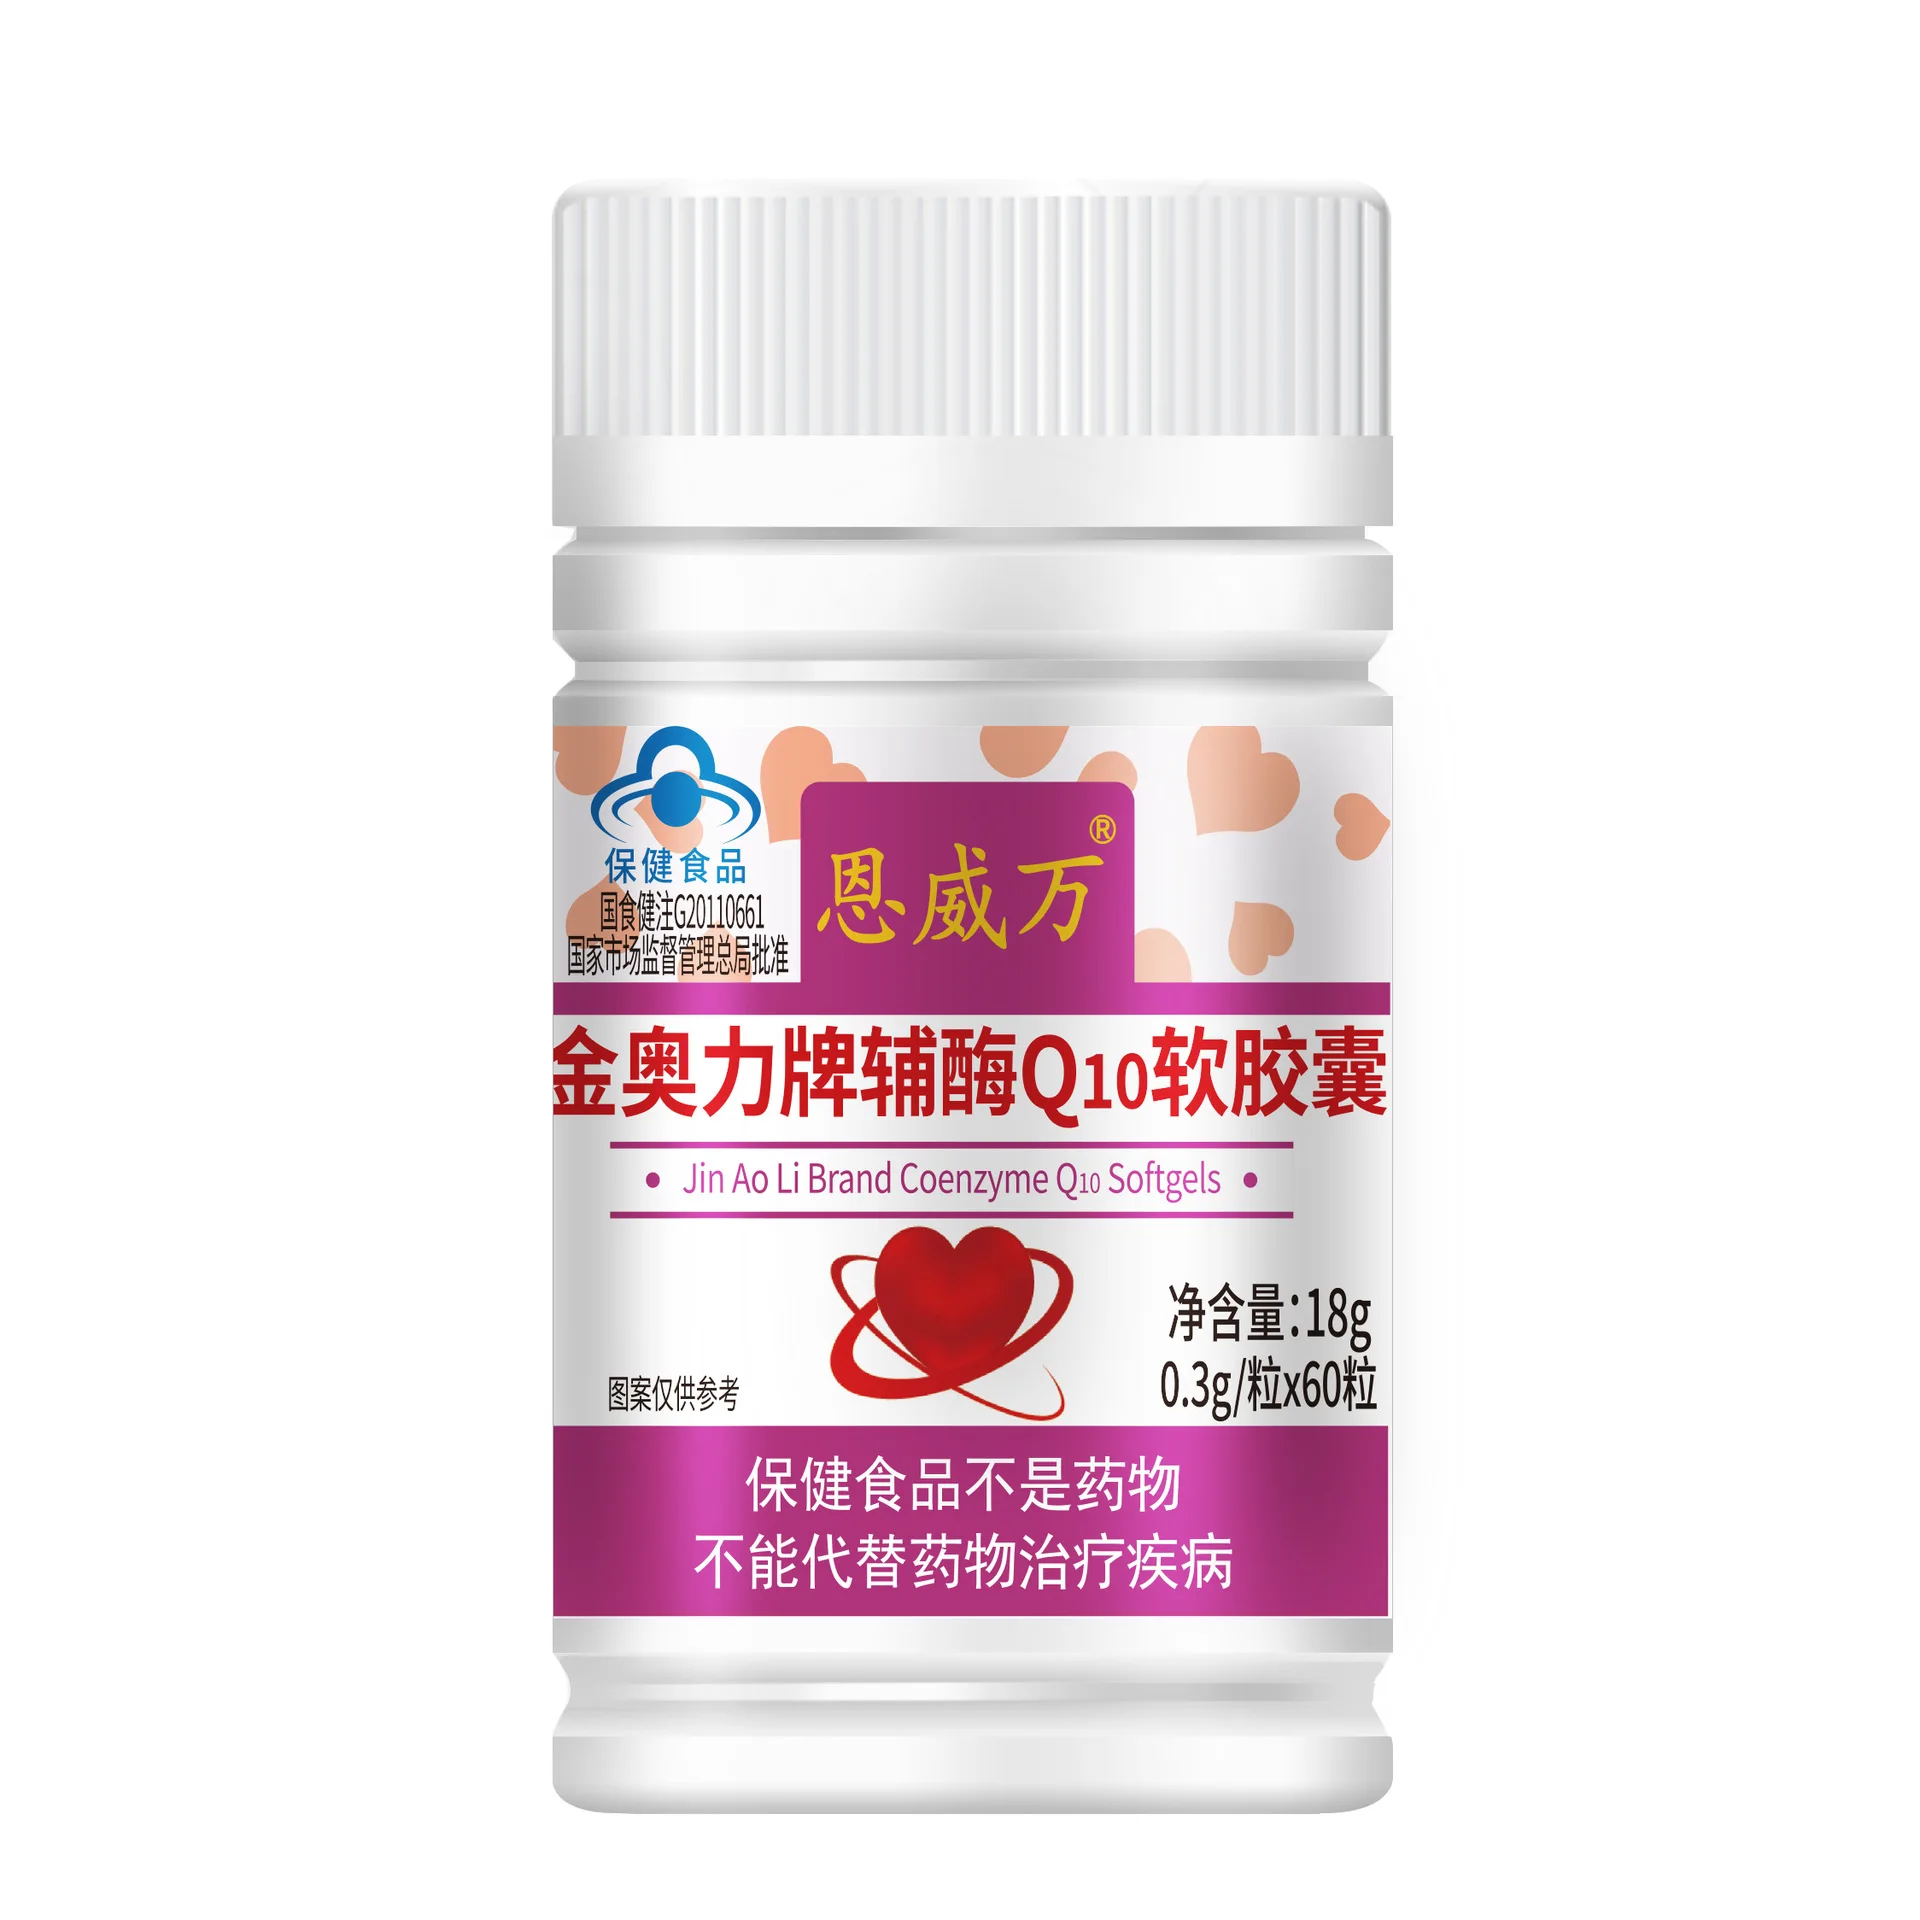 Coenzyme Q10 health food for middle-aged and elderly people to enhance immunity,free shipping